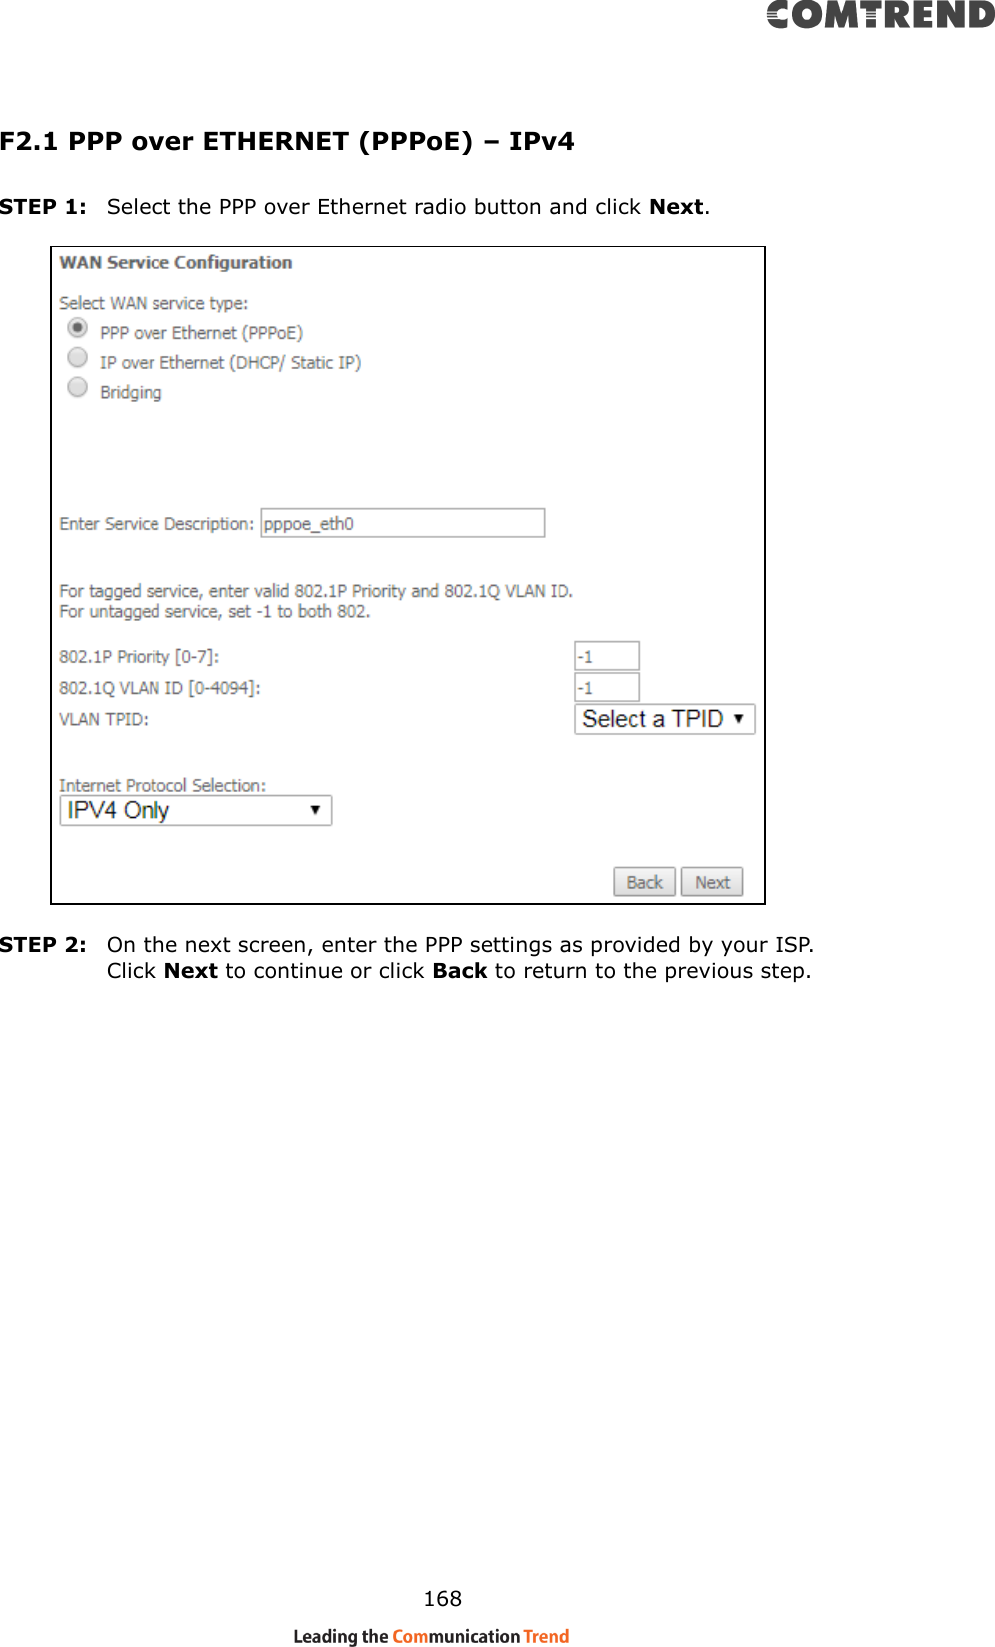    168 F2.1 PPP over ETHERNET (PPPoE) – IPv4 STEP 1:  Select the PPP over Ethernet radio button and click Next.      STEP 2:  On the next screen, enter the PPP settings as provided by your ISP.   Click Next to continue or click Back to return to the previous step.      